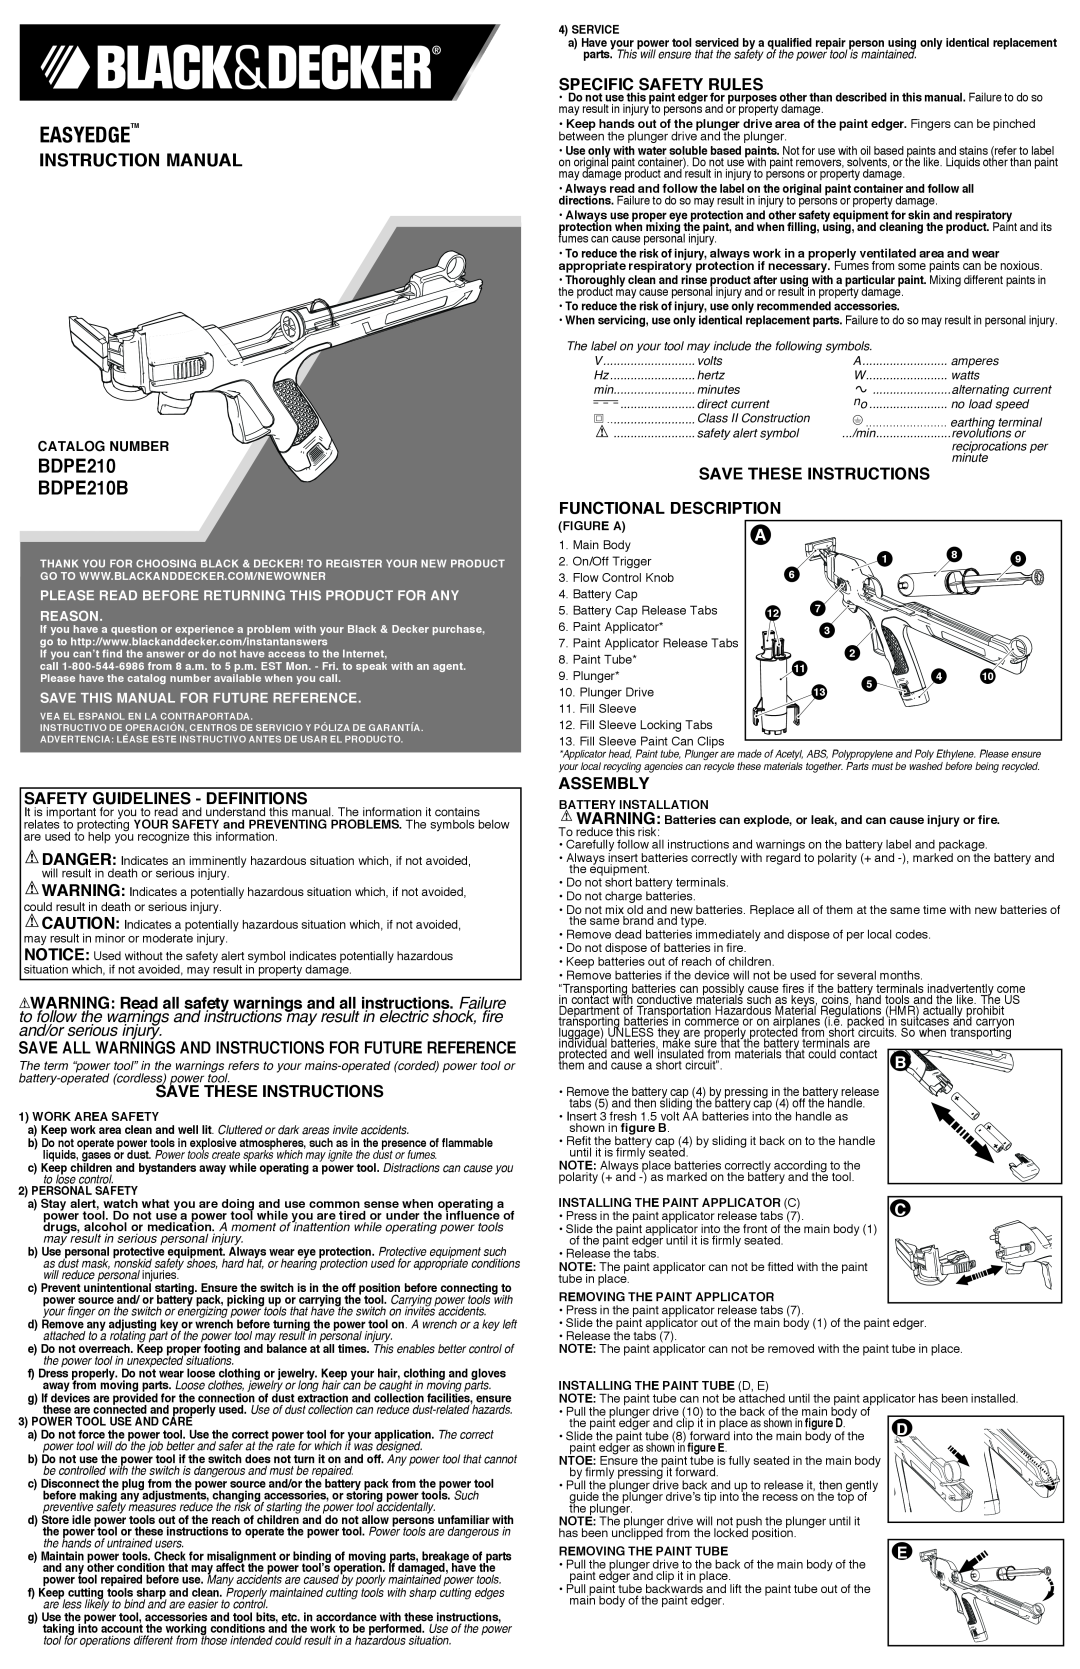 Black & Decker instruction manual BDPE210 BDPE210B, Safety Guidelines - Definitions, Save these instructions, Assembly 